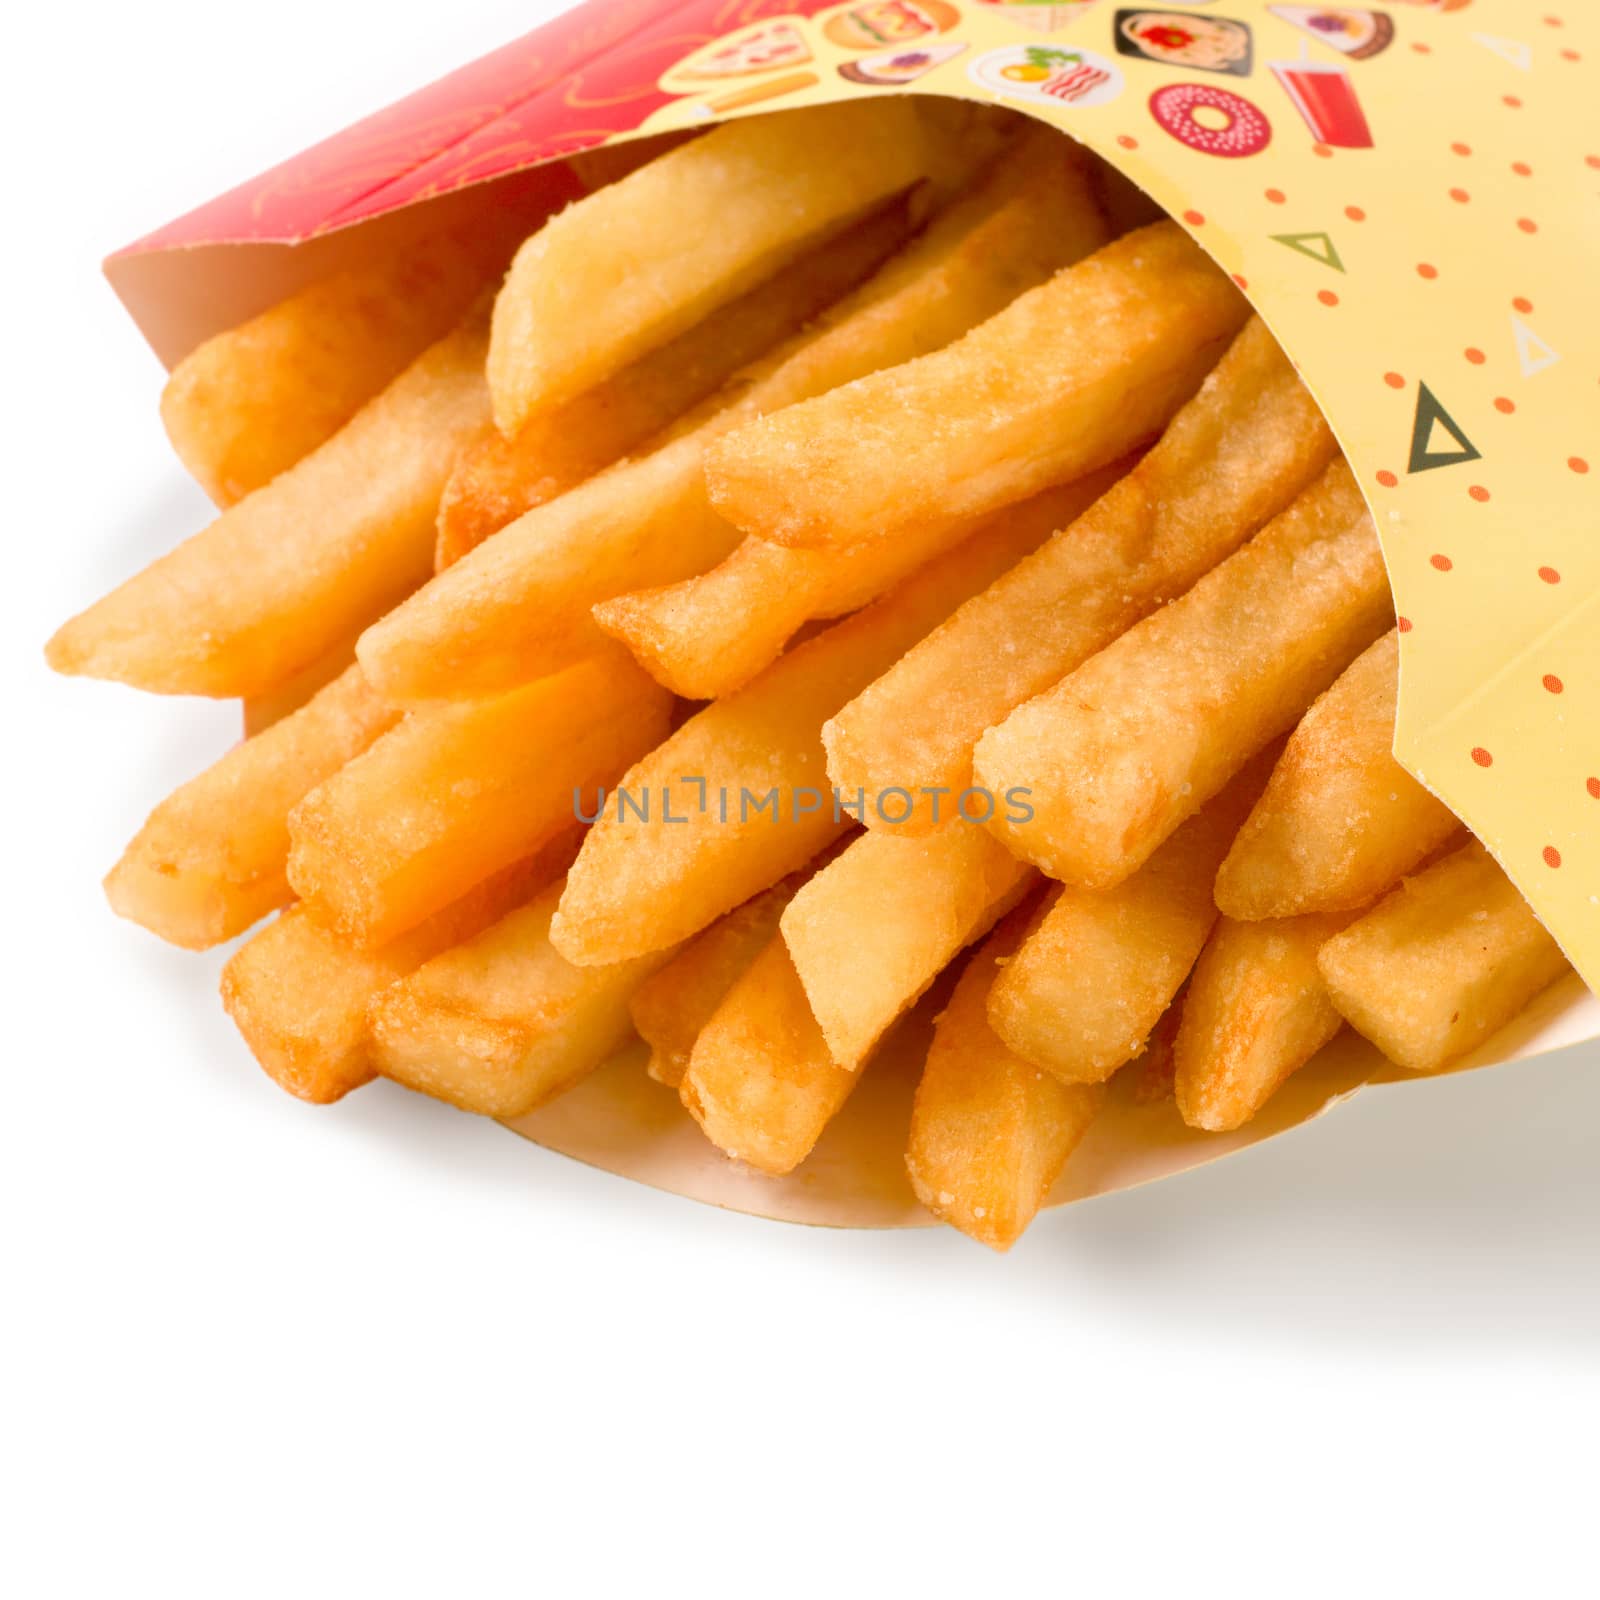 close up view of french fries in colorful cartoon box. Isolated on white with clipping path. Copy space.